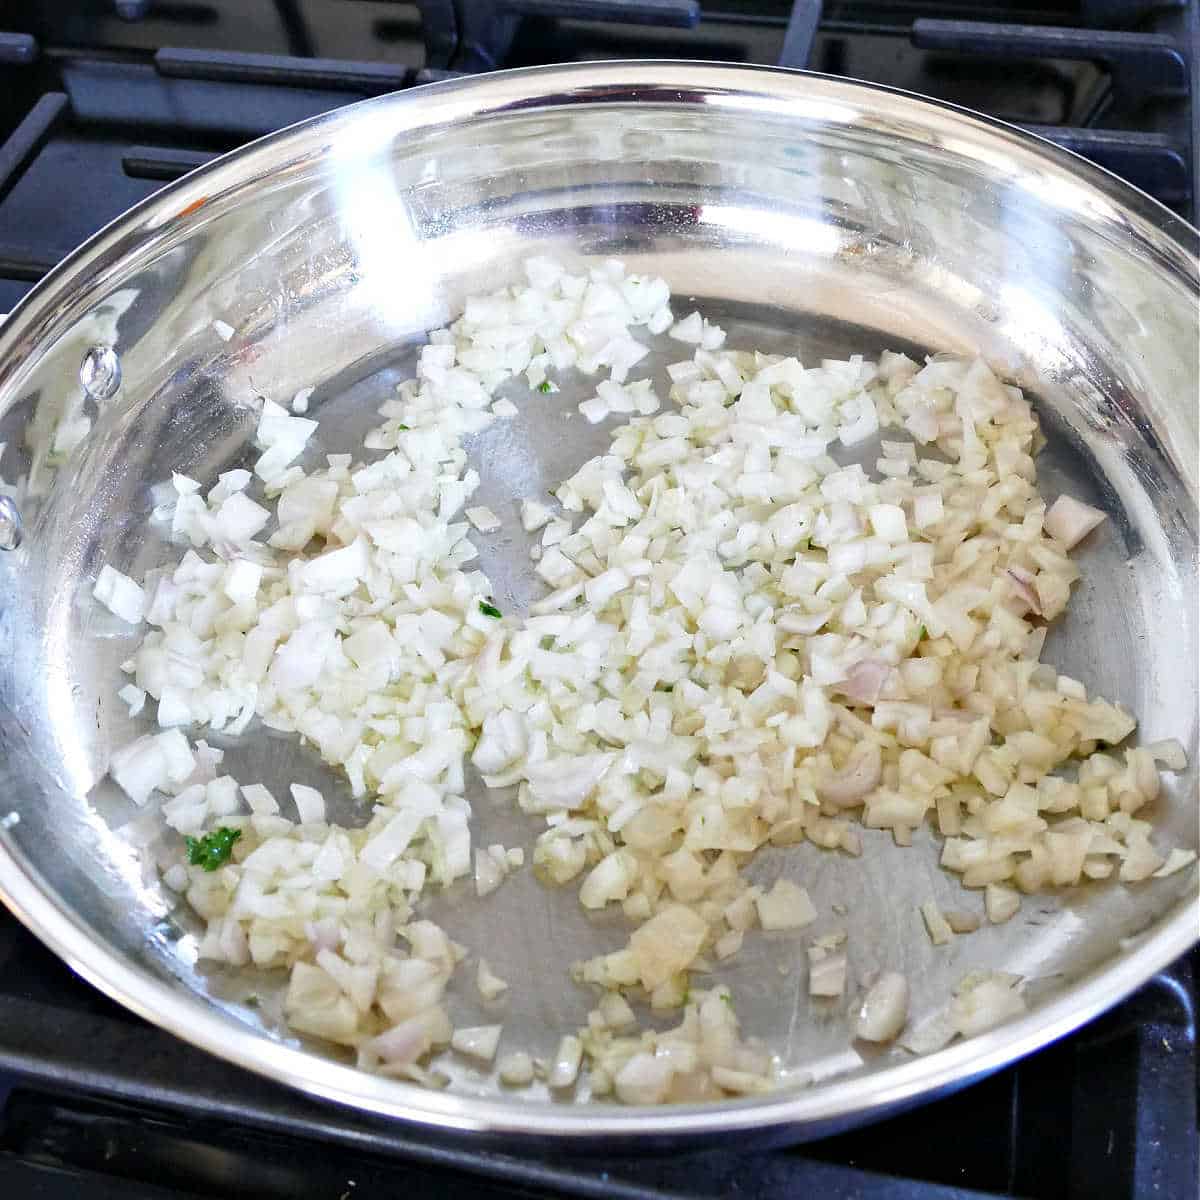 diced shallot cooking in olive oil in a large skillet on the stove